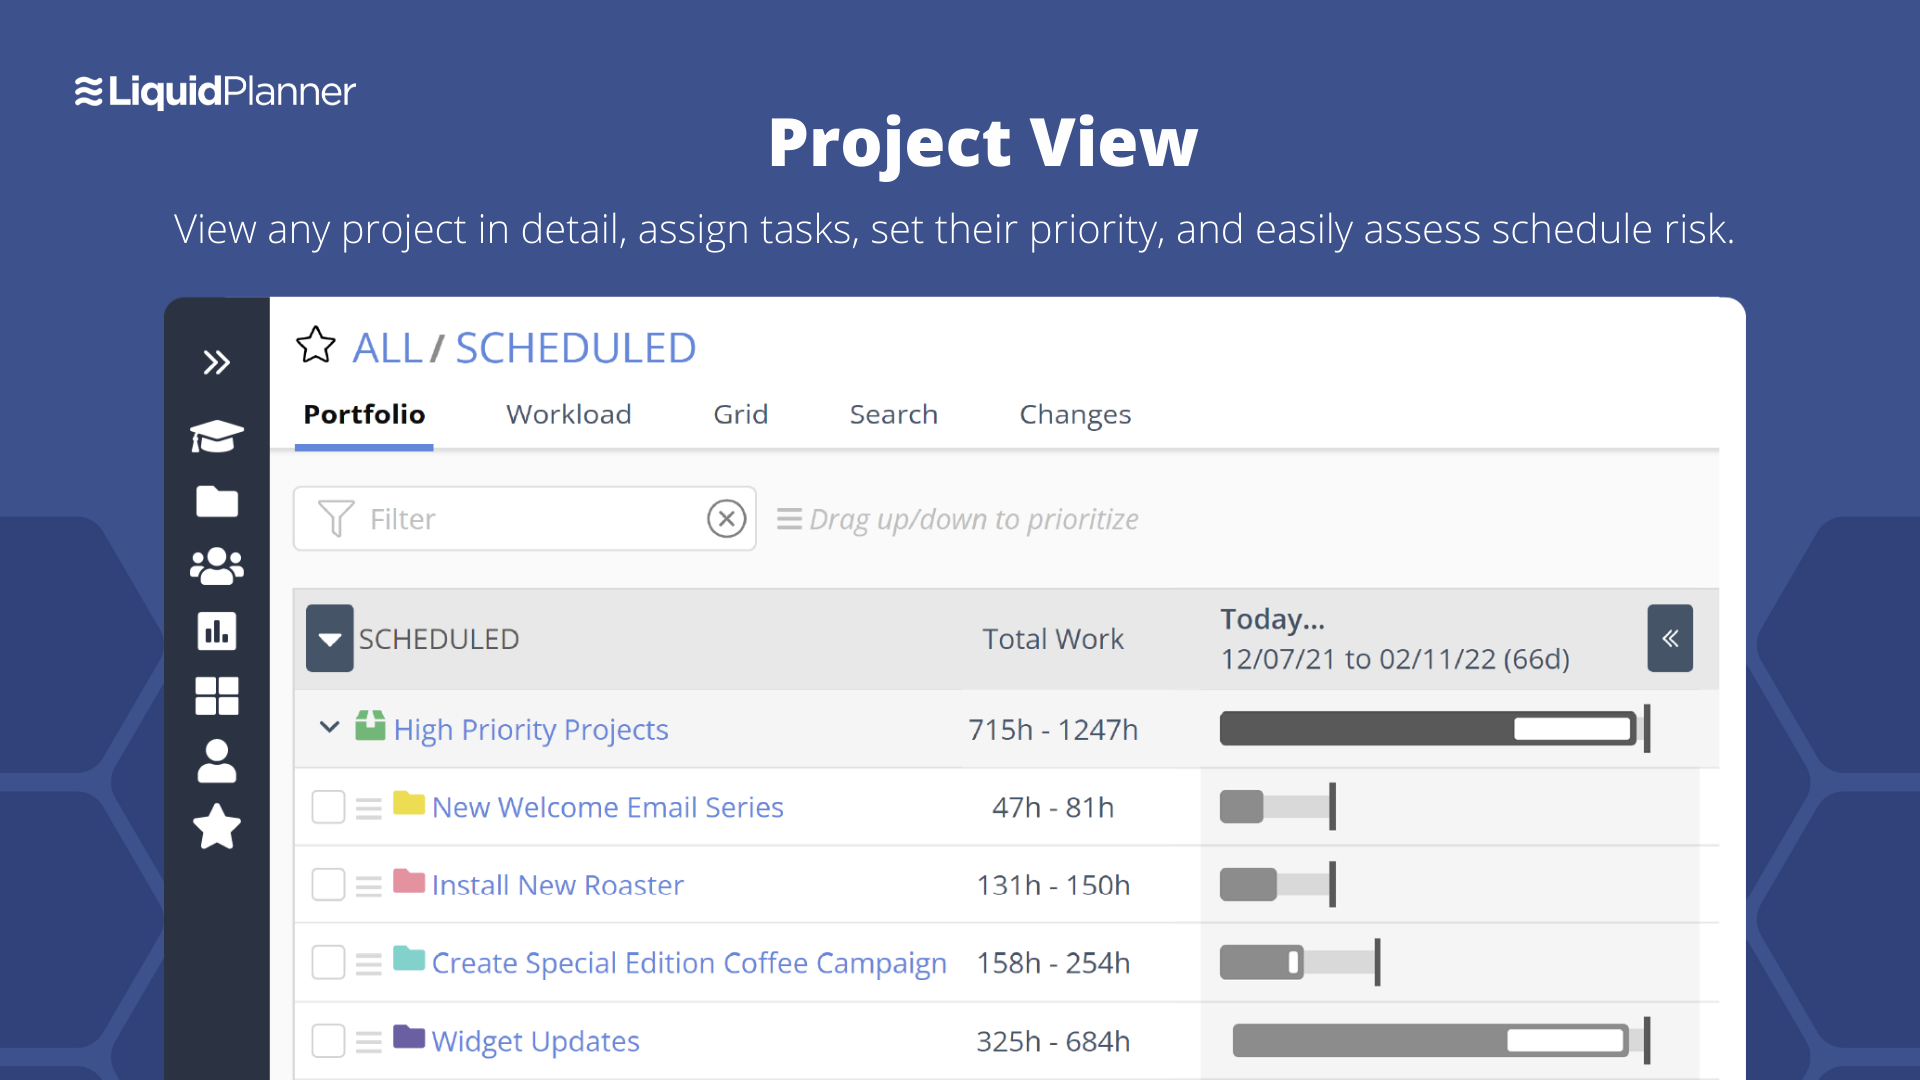 LiquidPlanner Software - Project view is where you can drill down into the project details to assign tasks, set priorities, and easily assess schedule risk. This level of insight allows you to make changes to the project plan before deadlines are missed.